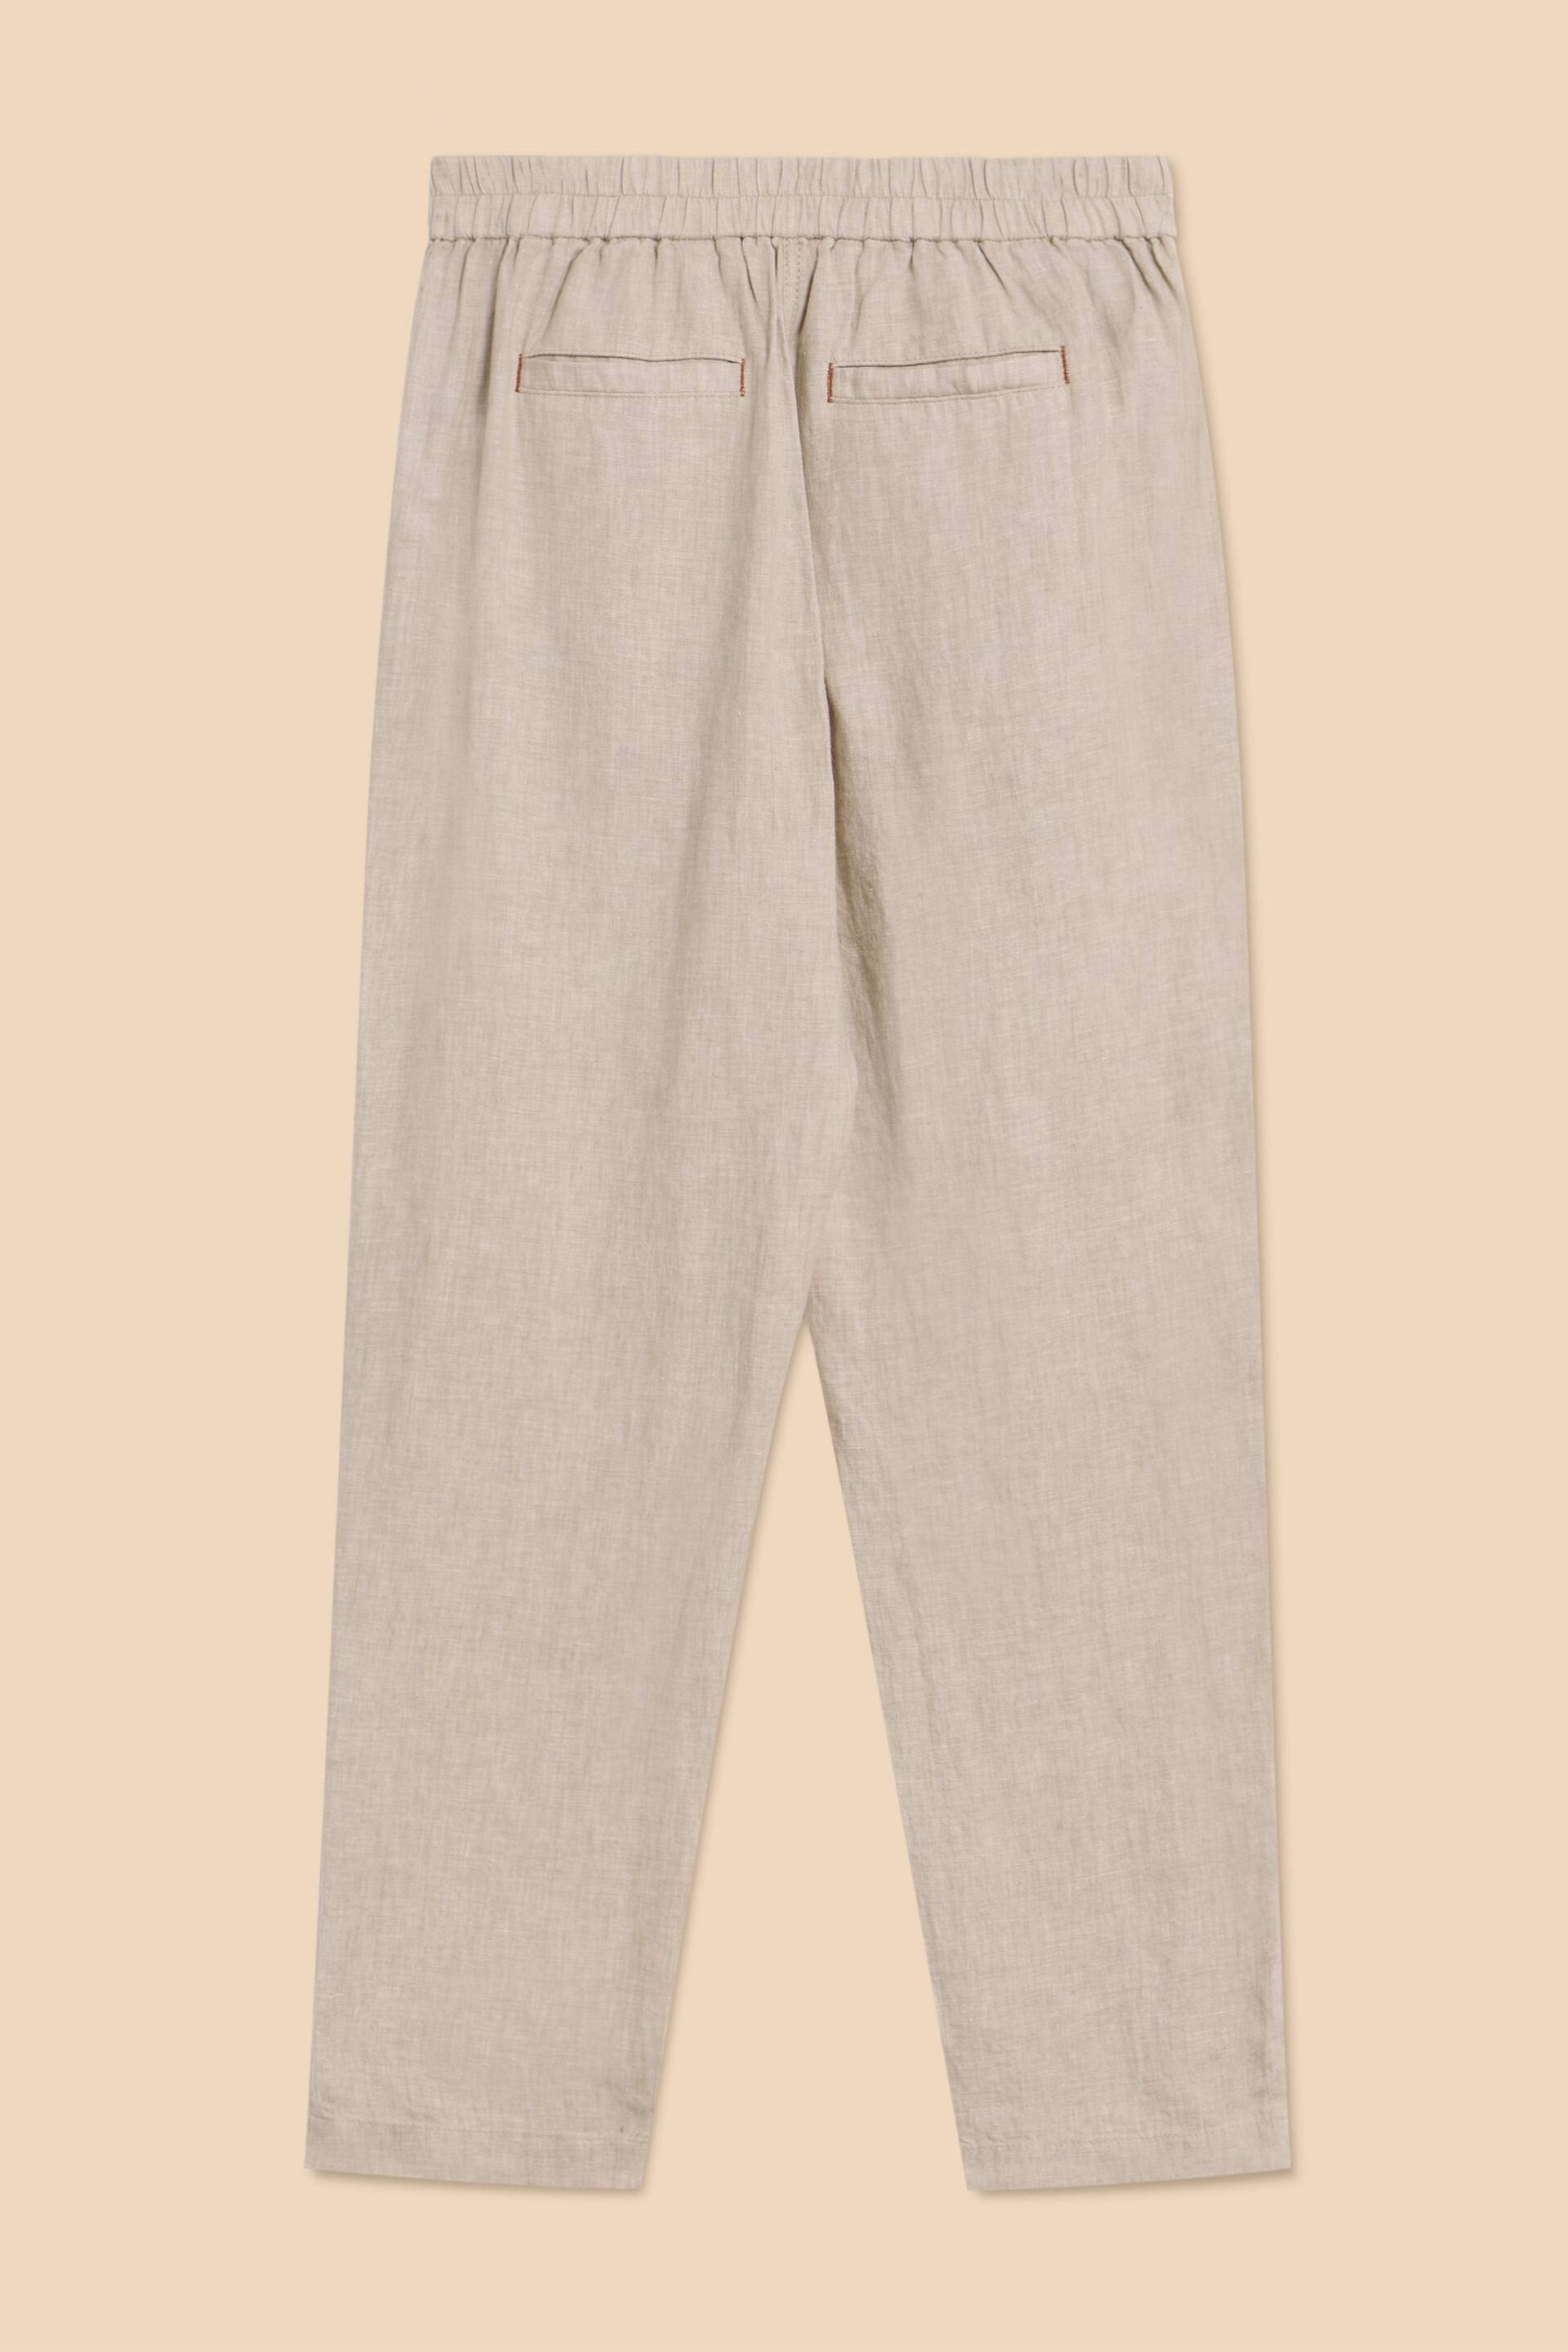 White Stuff Natural Rowena Linen Trousers - Image 6 of 7